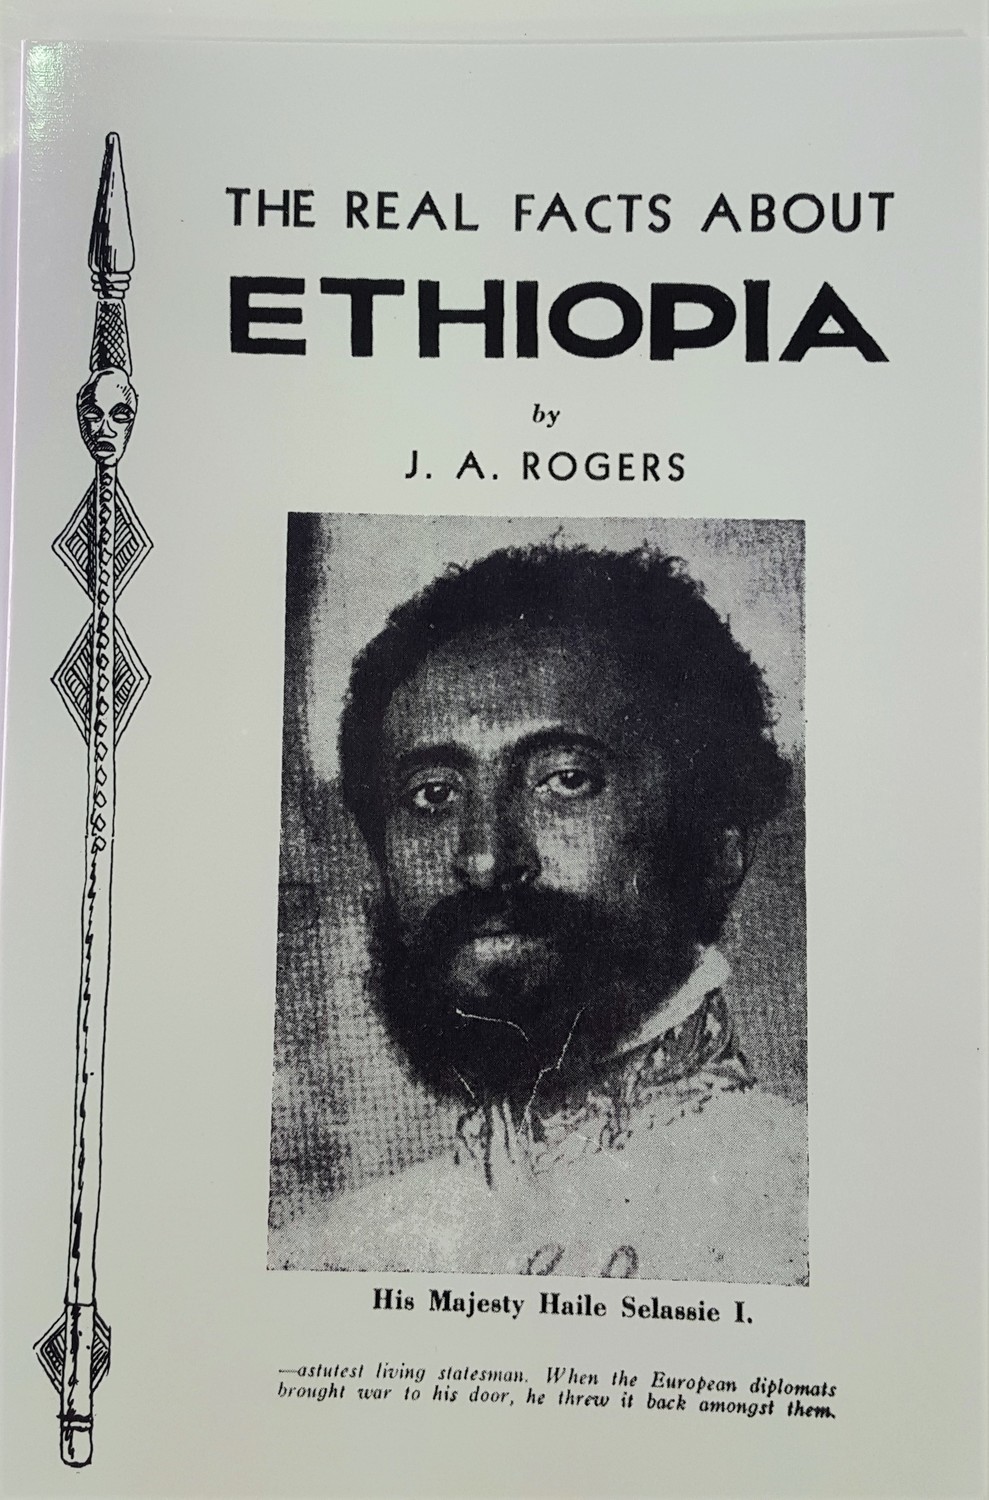 The Real Facts about Ethiopia (Paperback) by: J. A. Rogers (Author)